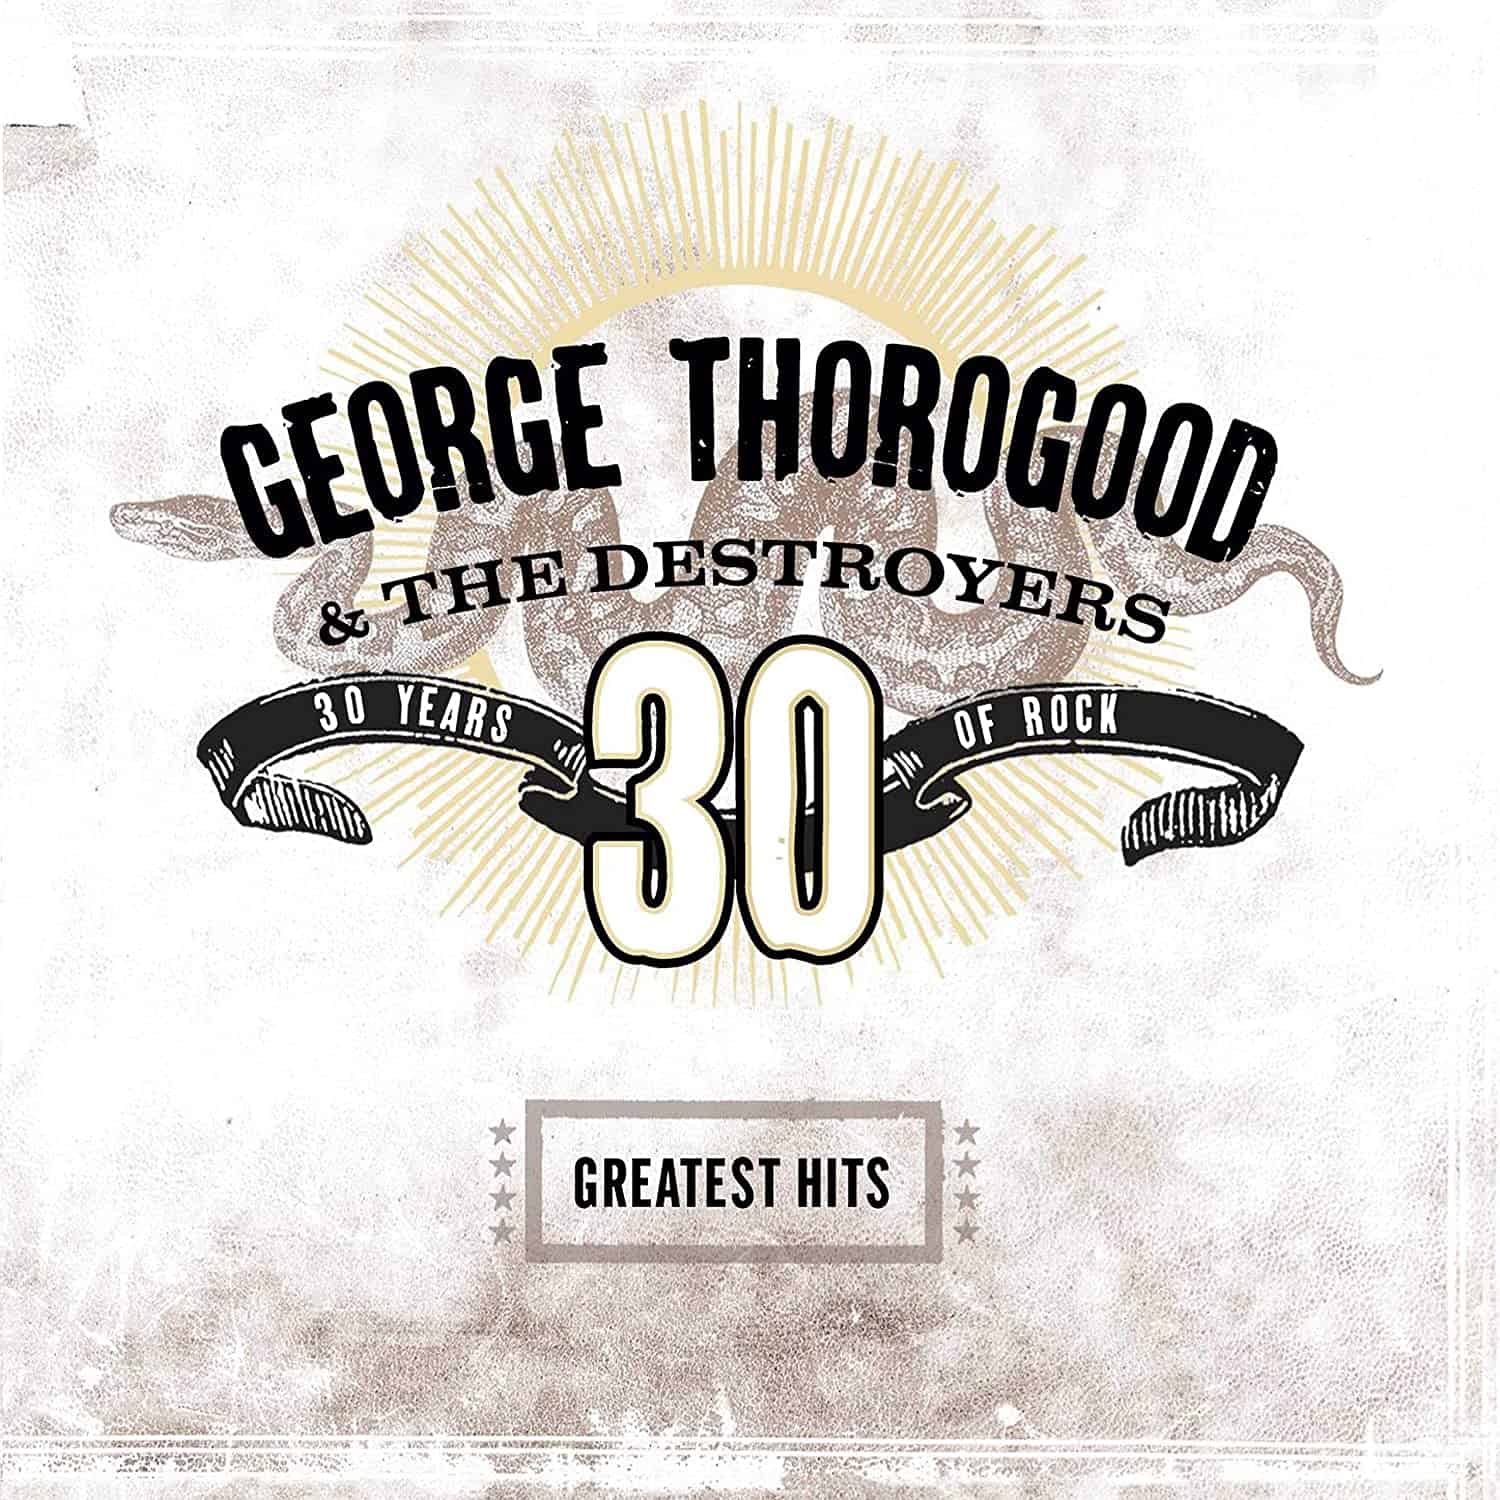 George-Thorog00d-30-Years-of-Rock-Greatest-Hits-vinyl-LP-record-album-front